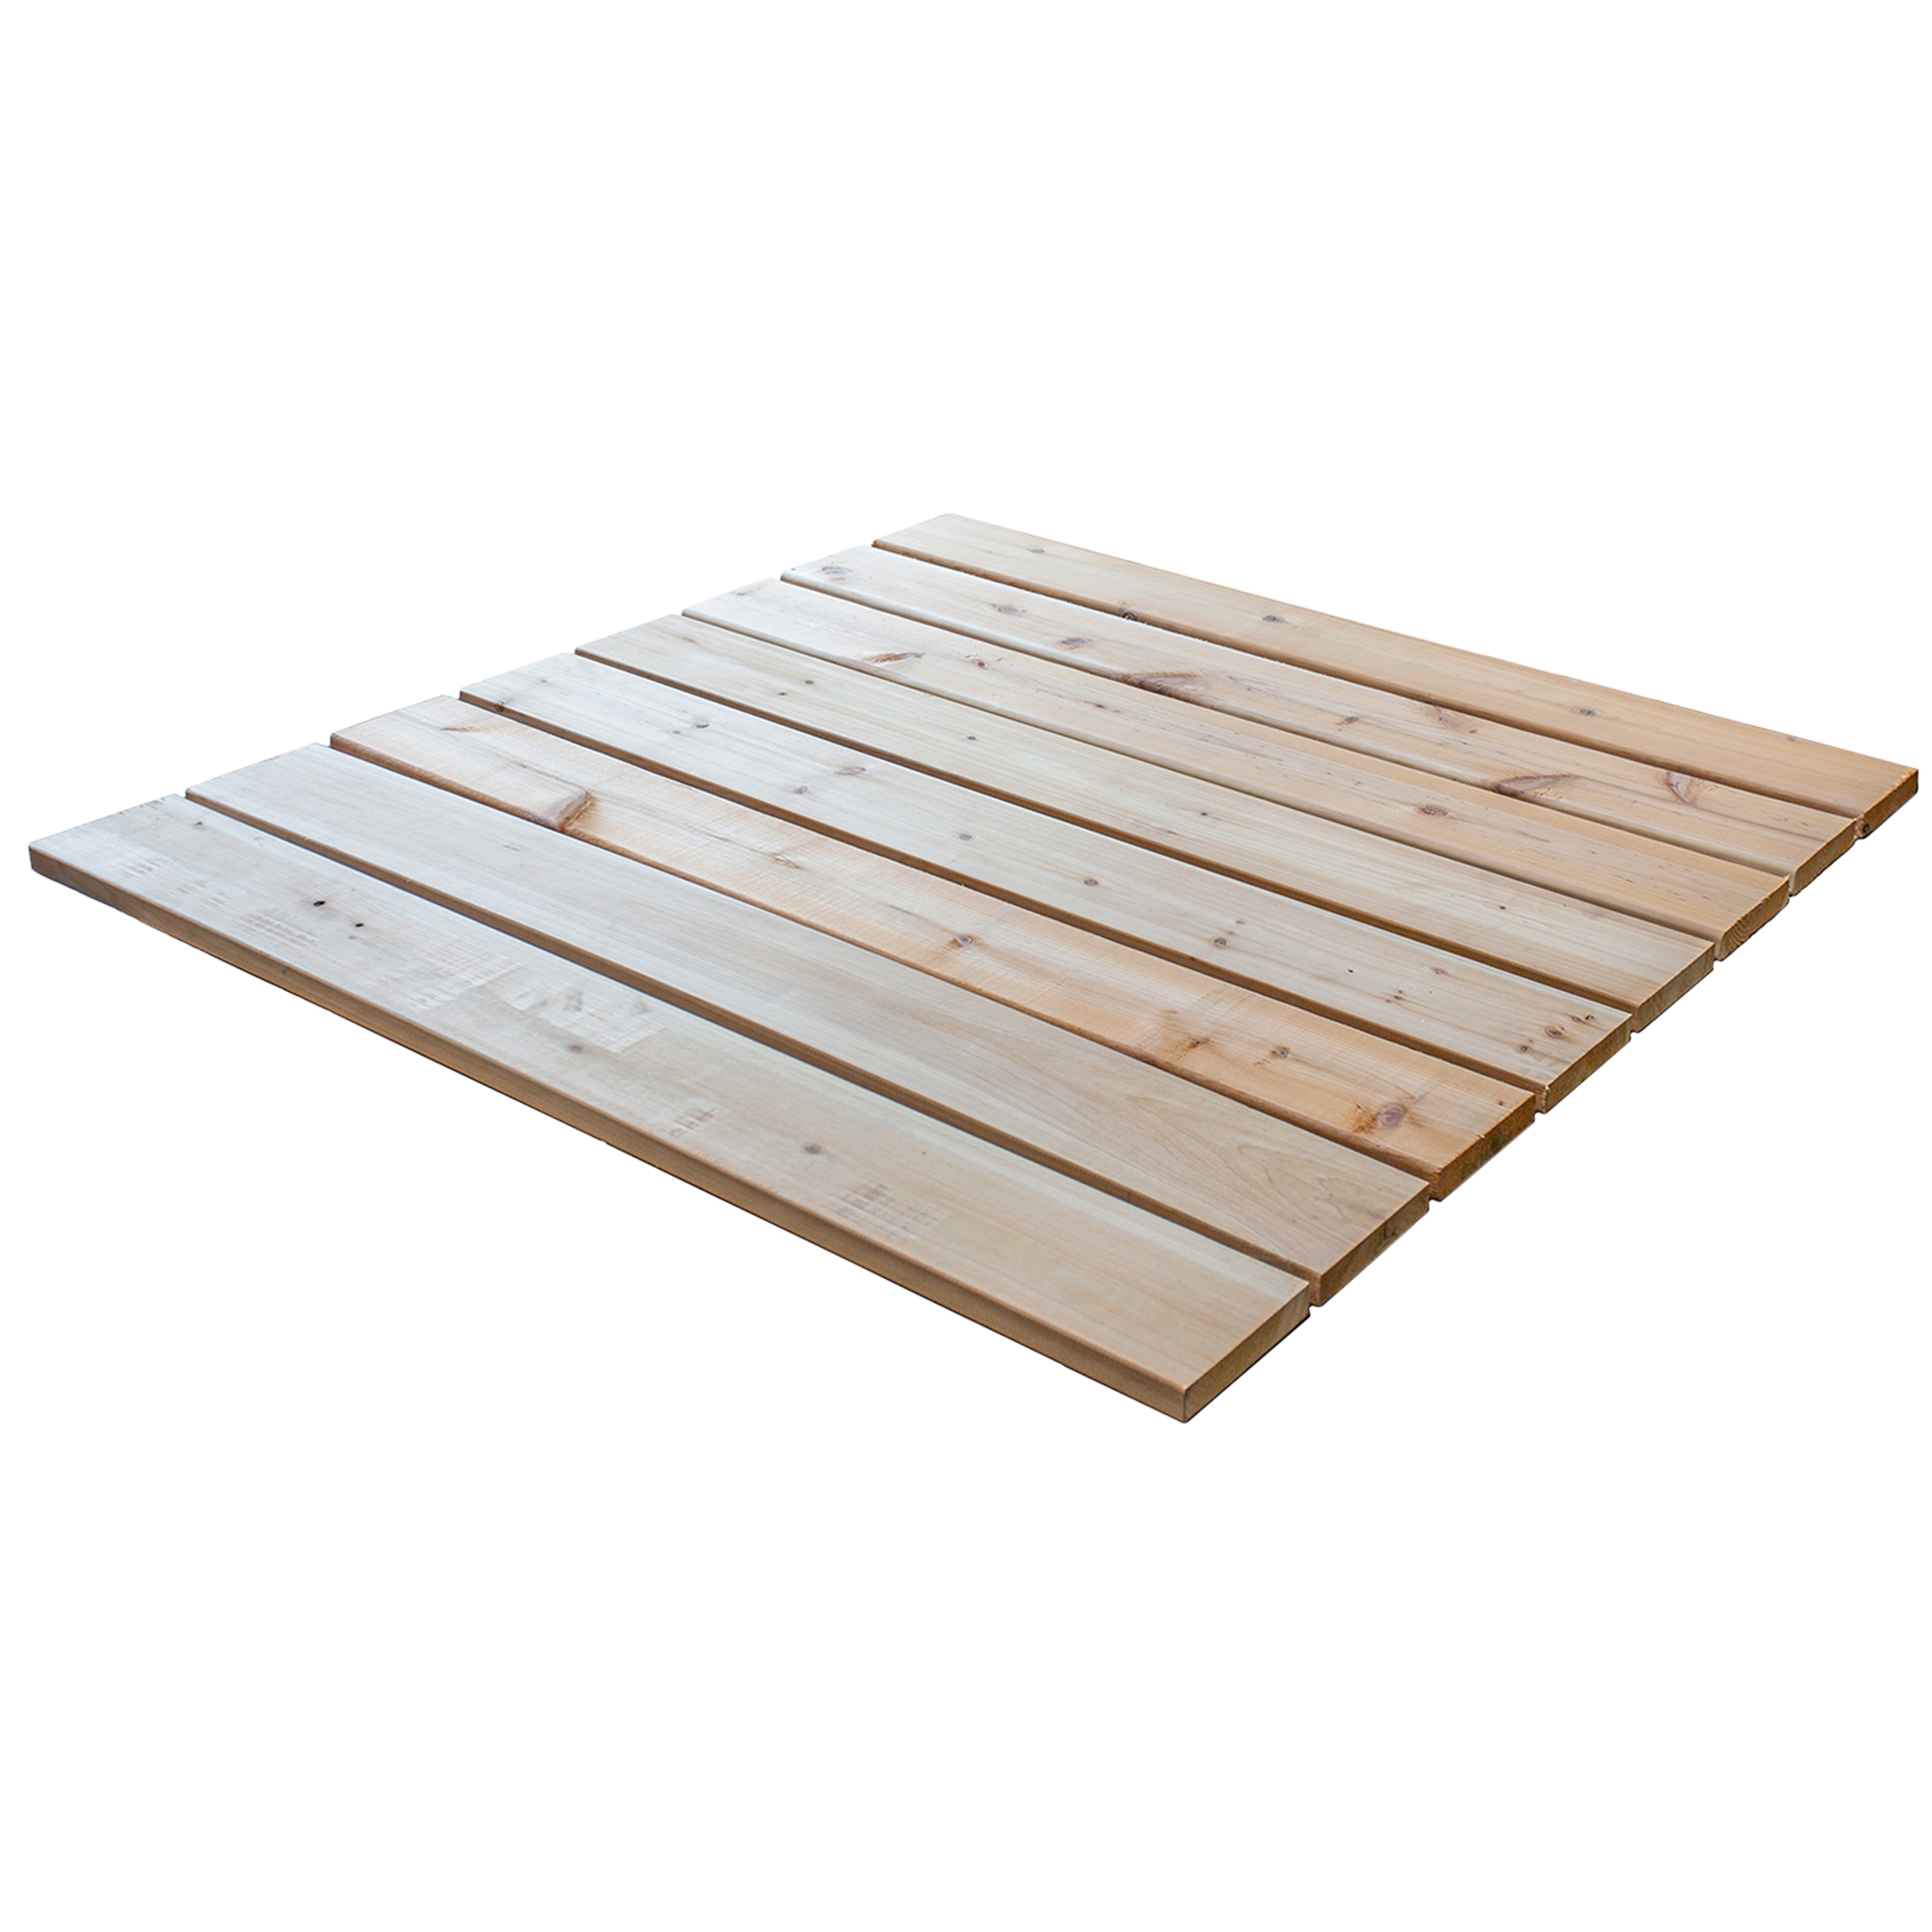 4' X 4' Drop In Panel Kit - CEDAR (Used for 4'x8' Section)